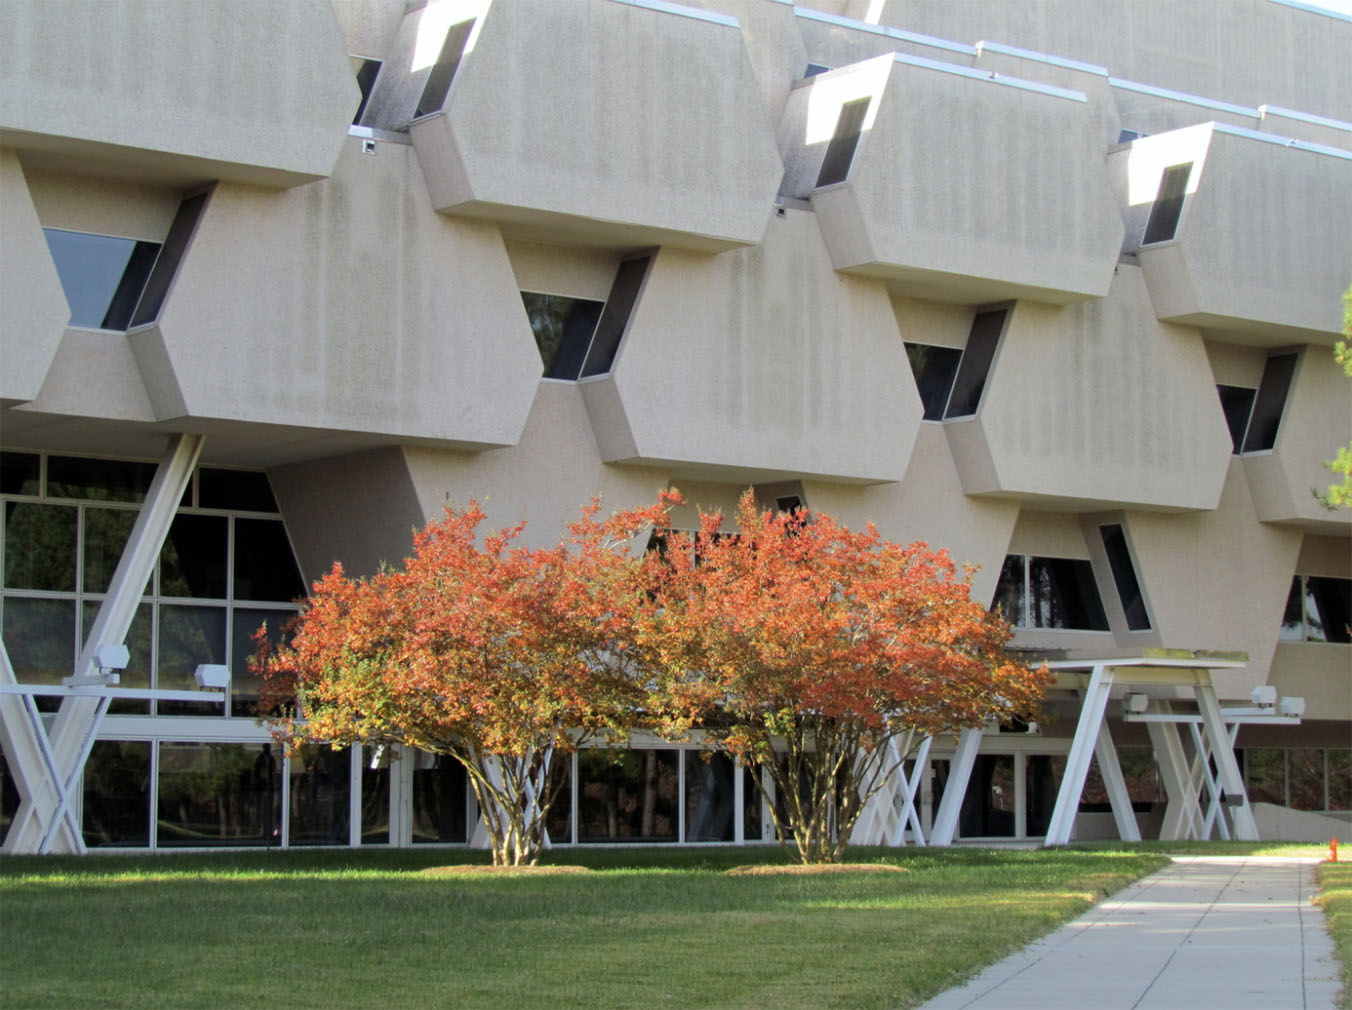 Burroughs Wellcome building designed by Paul Rudolph is now facing demolition